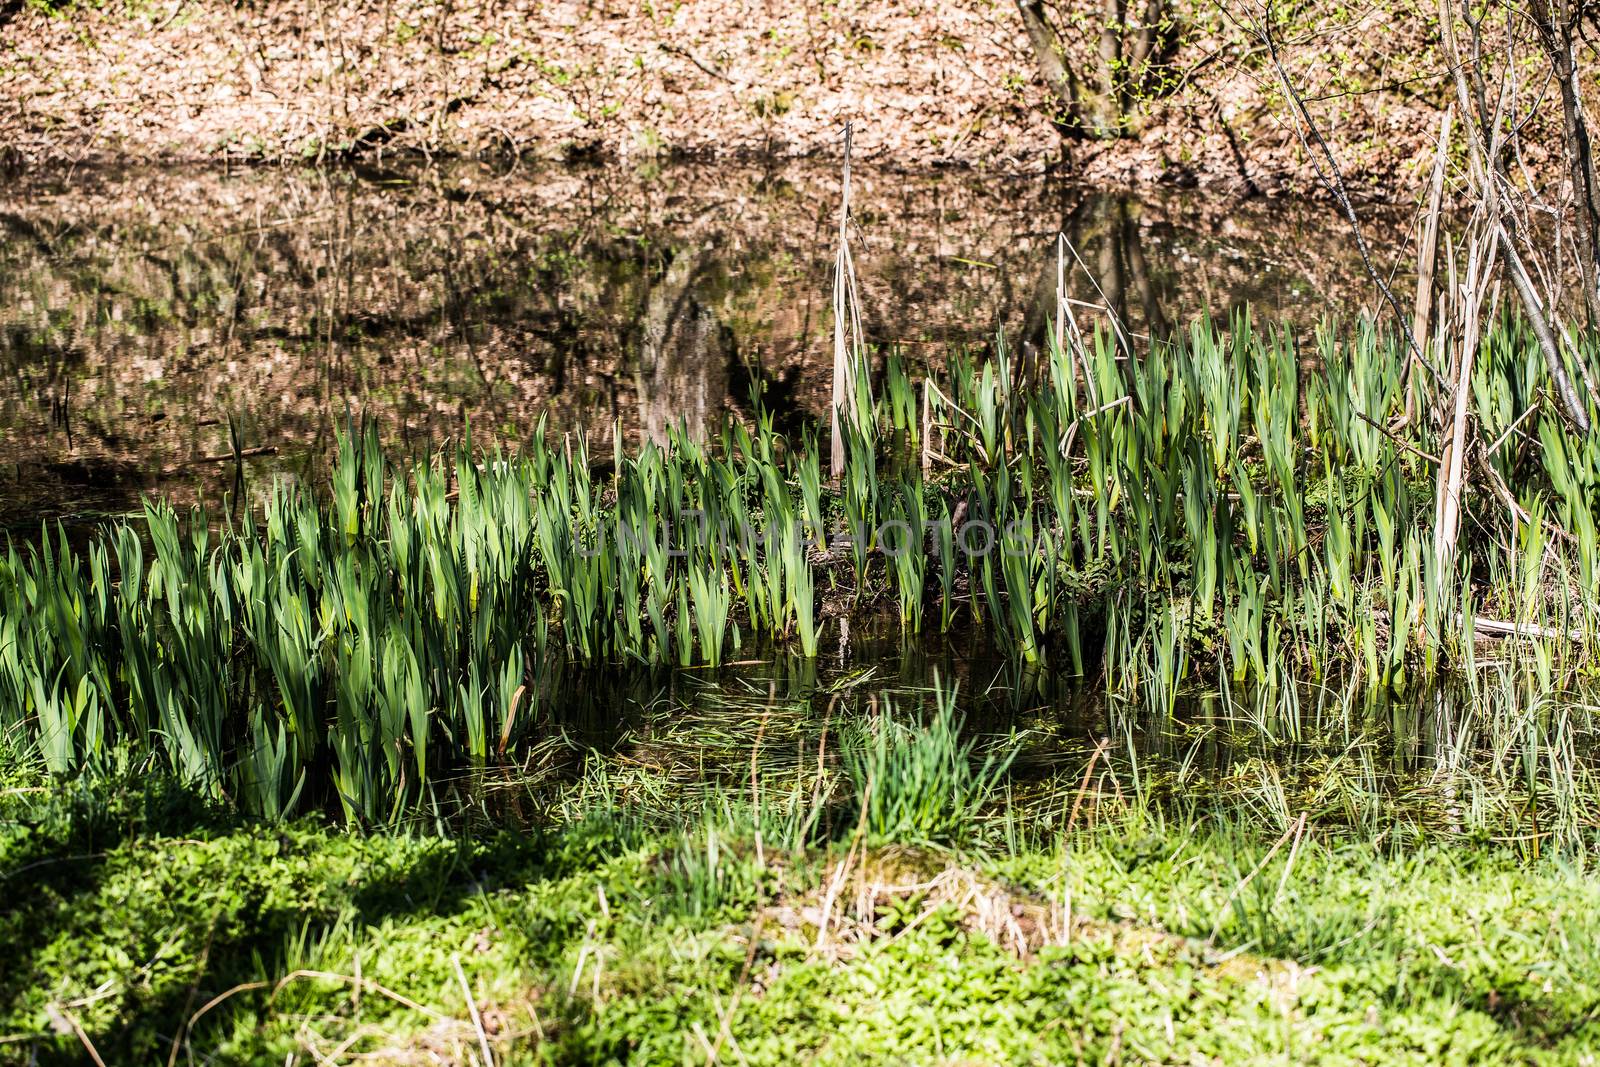 Pond with reeds and grass